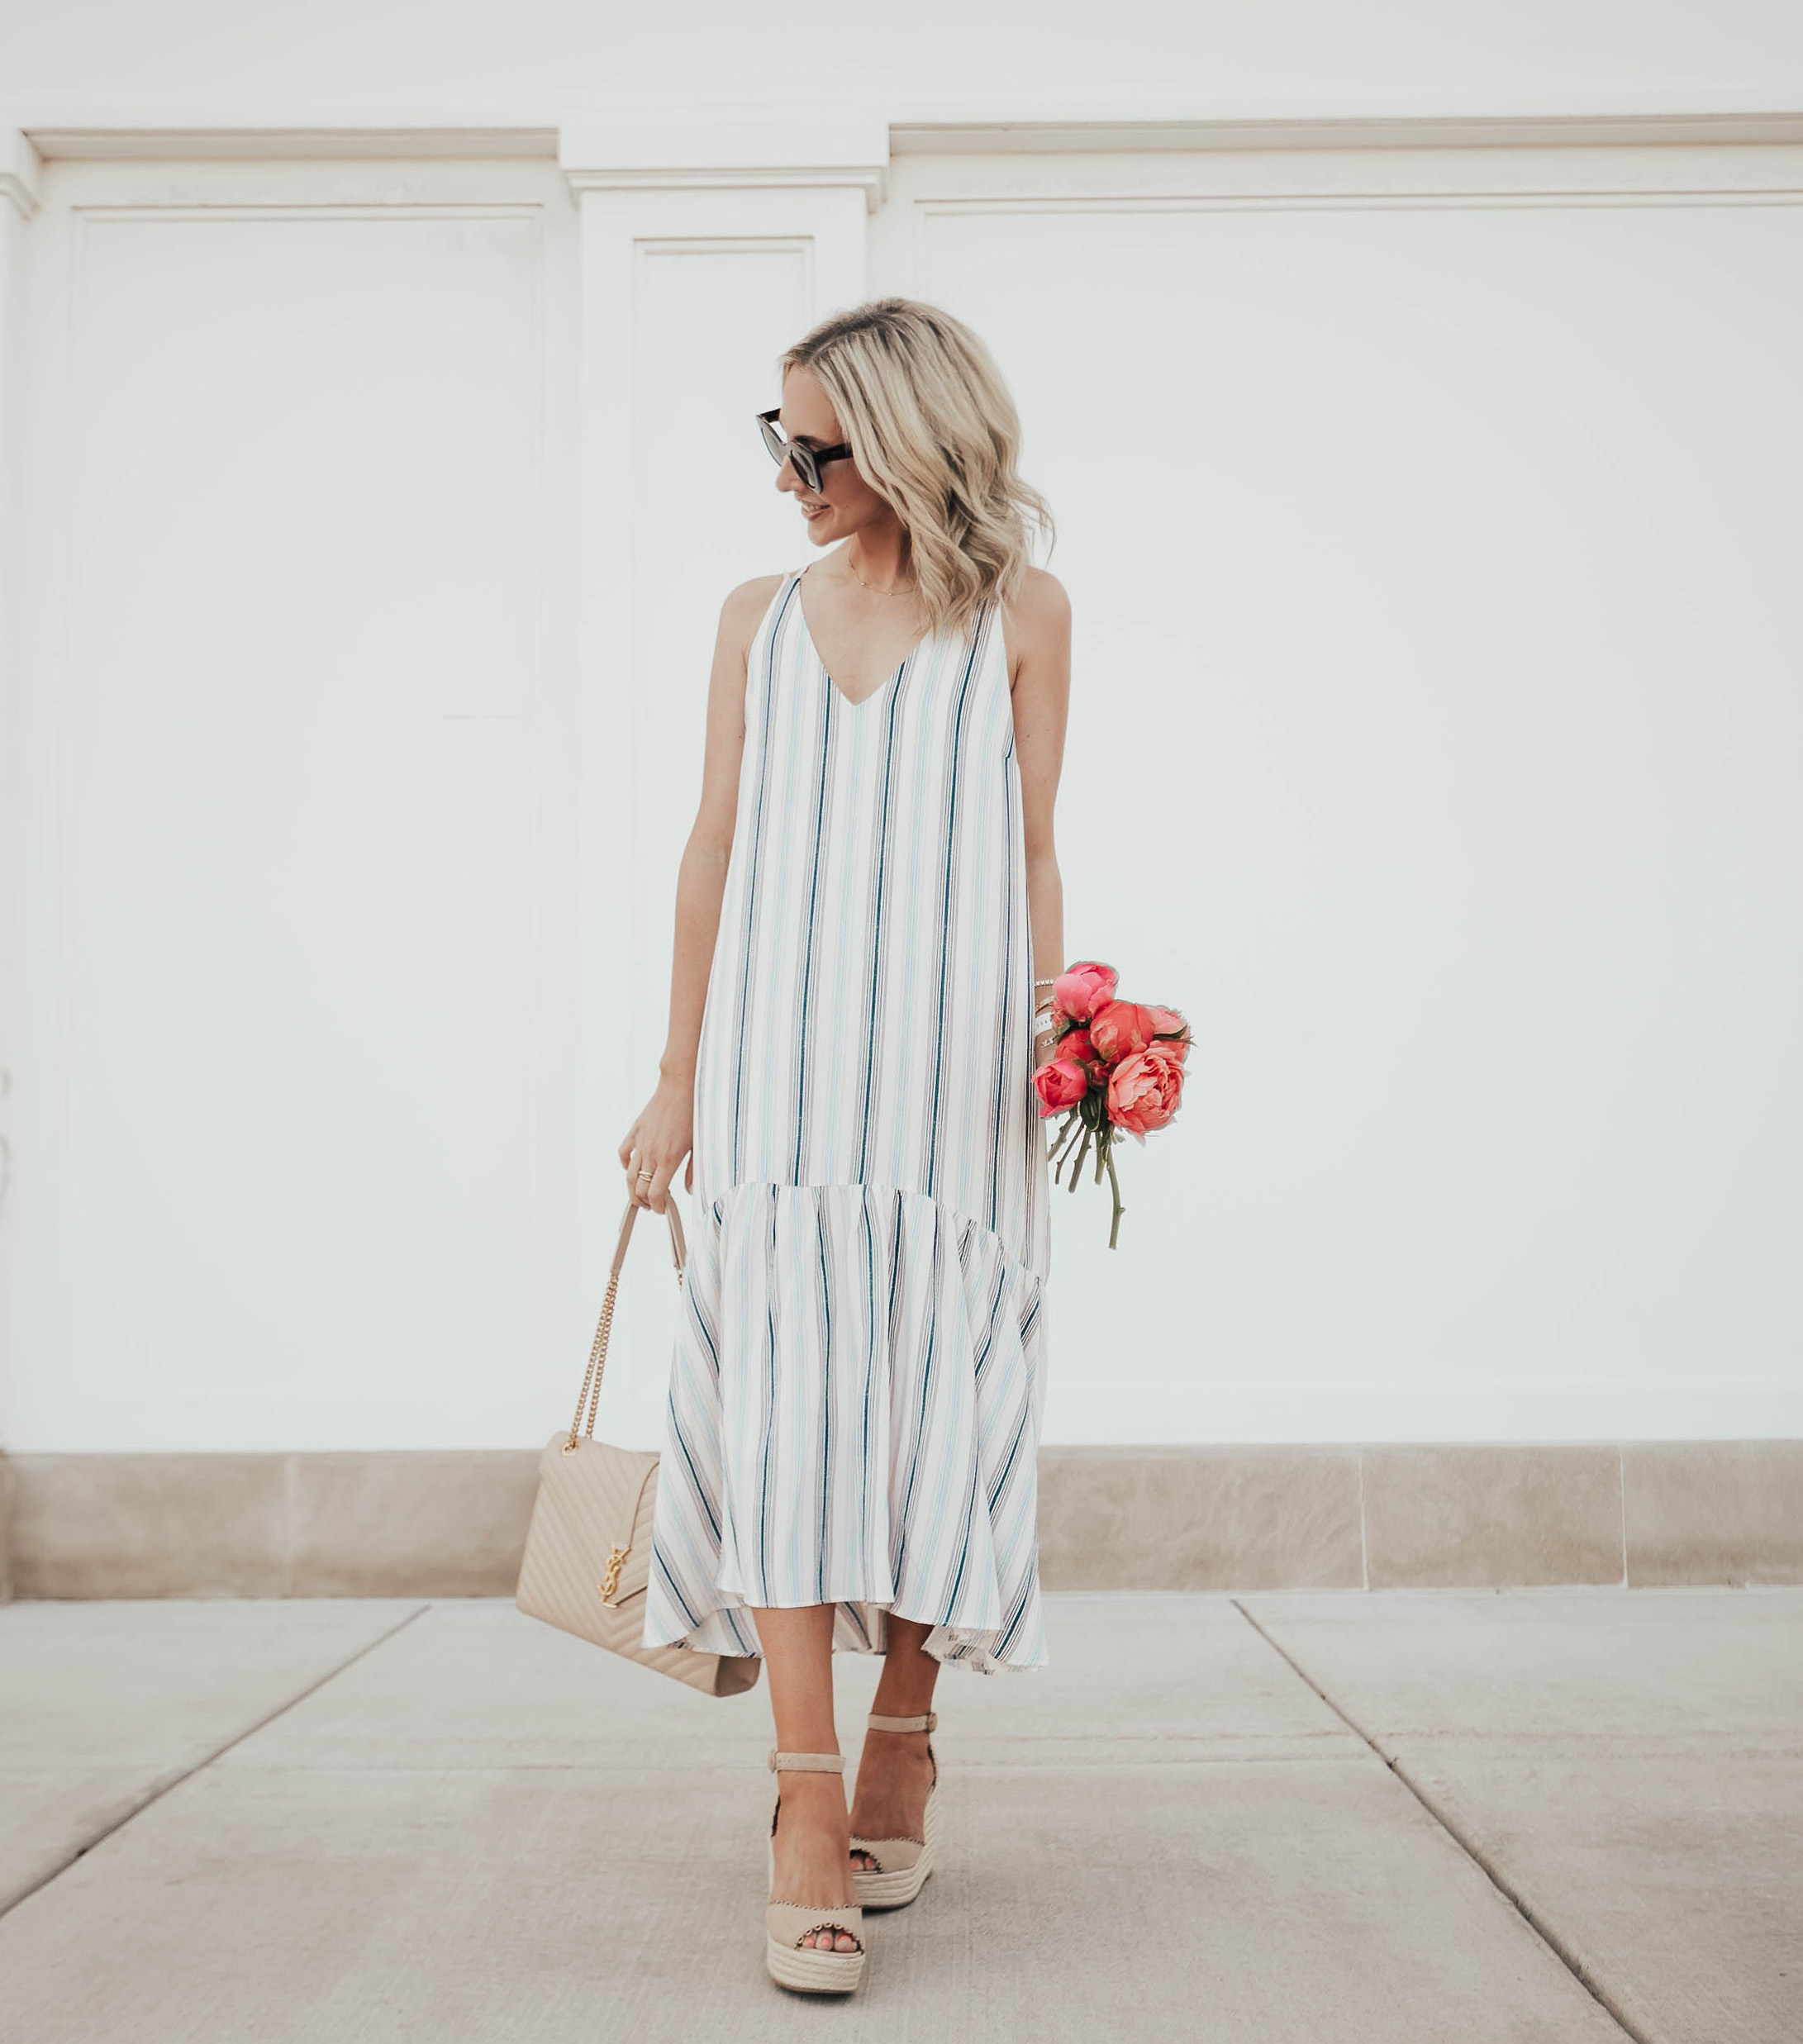 Reno, Nevada Blogger, Emily Farren Wieczorek of Two Peas in a Prada talks about her favorite wedge sandals for summer by Pelle Moda via Zappos